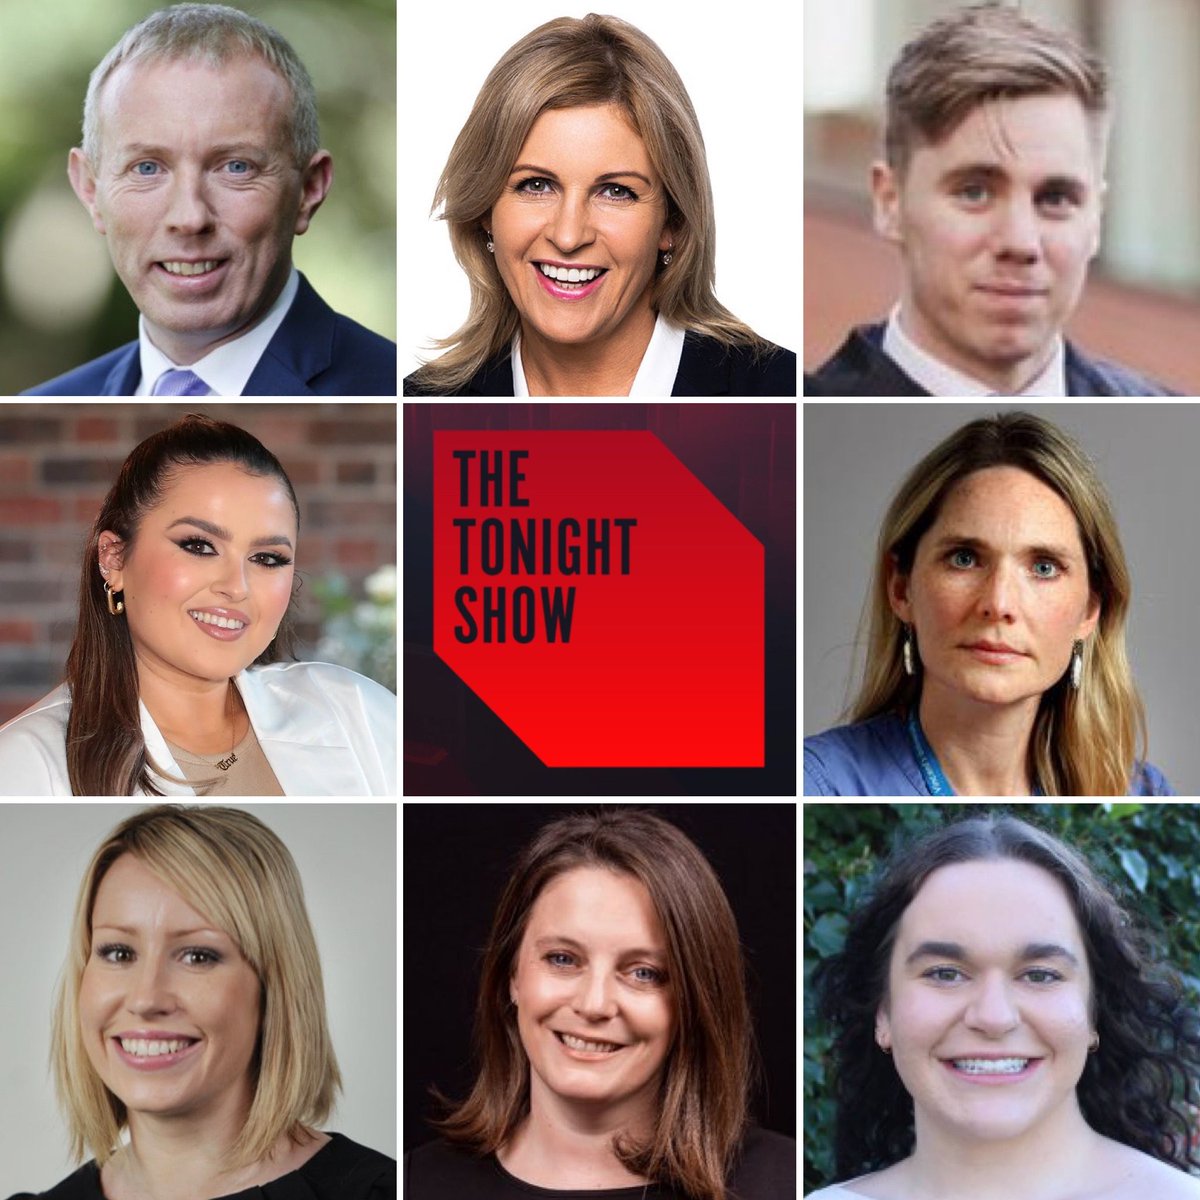 📺 #TonightVMTV is back tonight at 10pm

🚨EU prep intervention in electricity market

🚨Third-level accommodation crisis

🚨Concerns over weight-loss surgeries abroad

@timmydooley @conwaywalsh @hughescraig90 @HeneghanHelen @ShivMagST @aideenkate @suzannelynch1 @mollygreenough